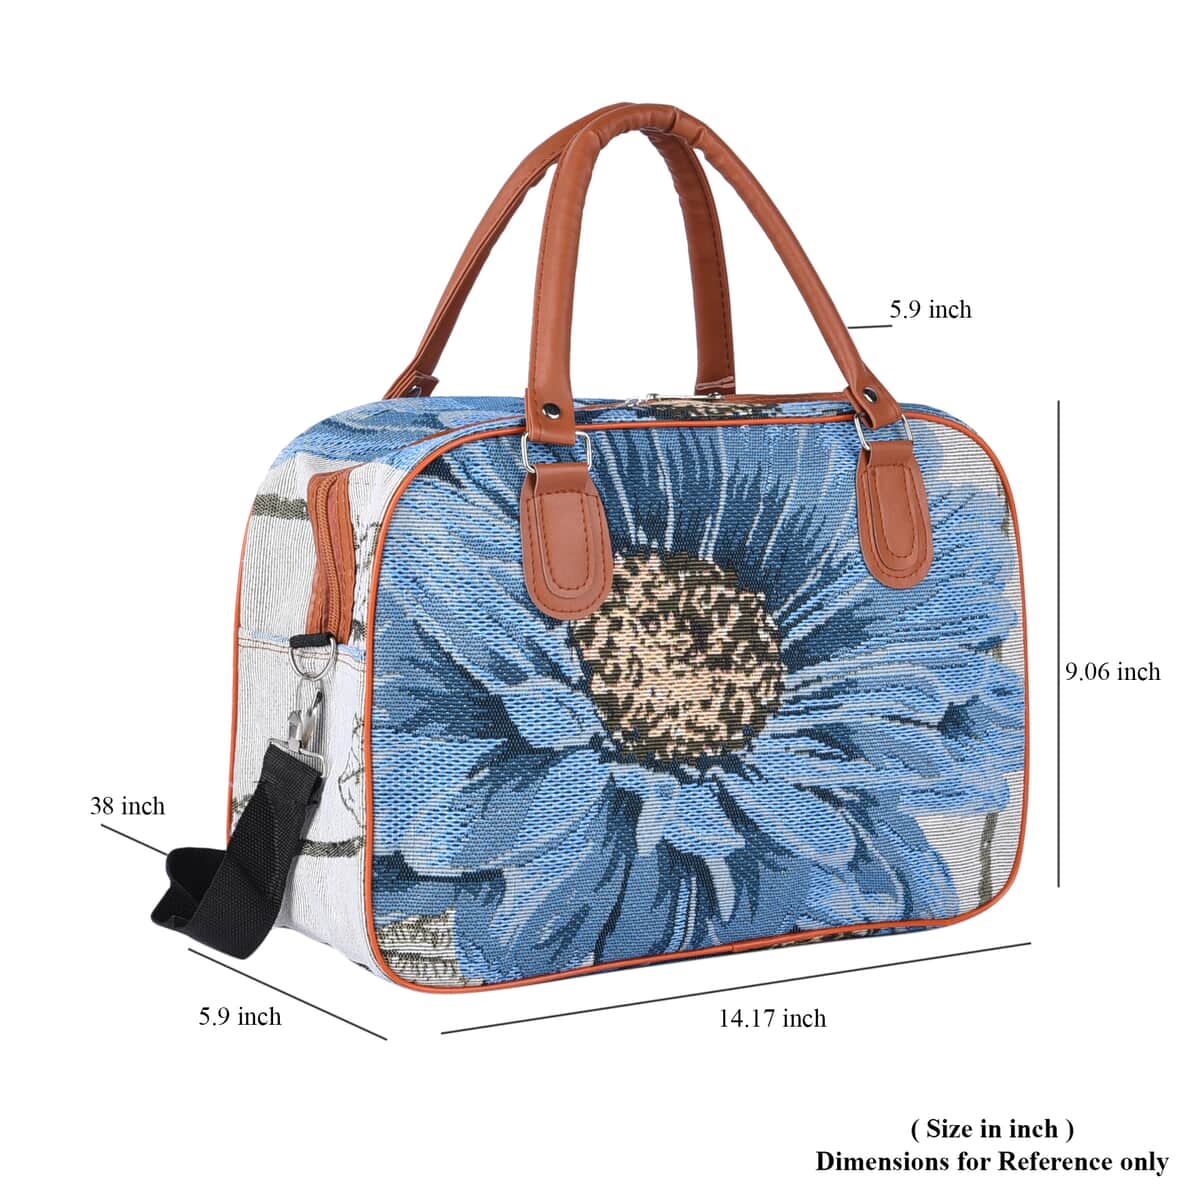 Off White and Blue Flower Pattern Jute Travel Bag (14.17"x5.9"x9.06") with 38 Inches Shoulder Strap image number 6